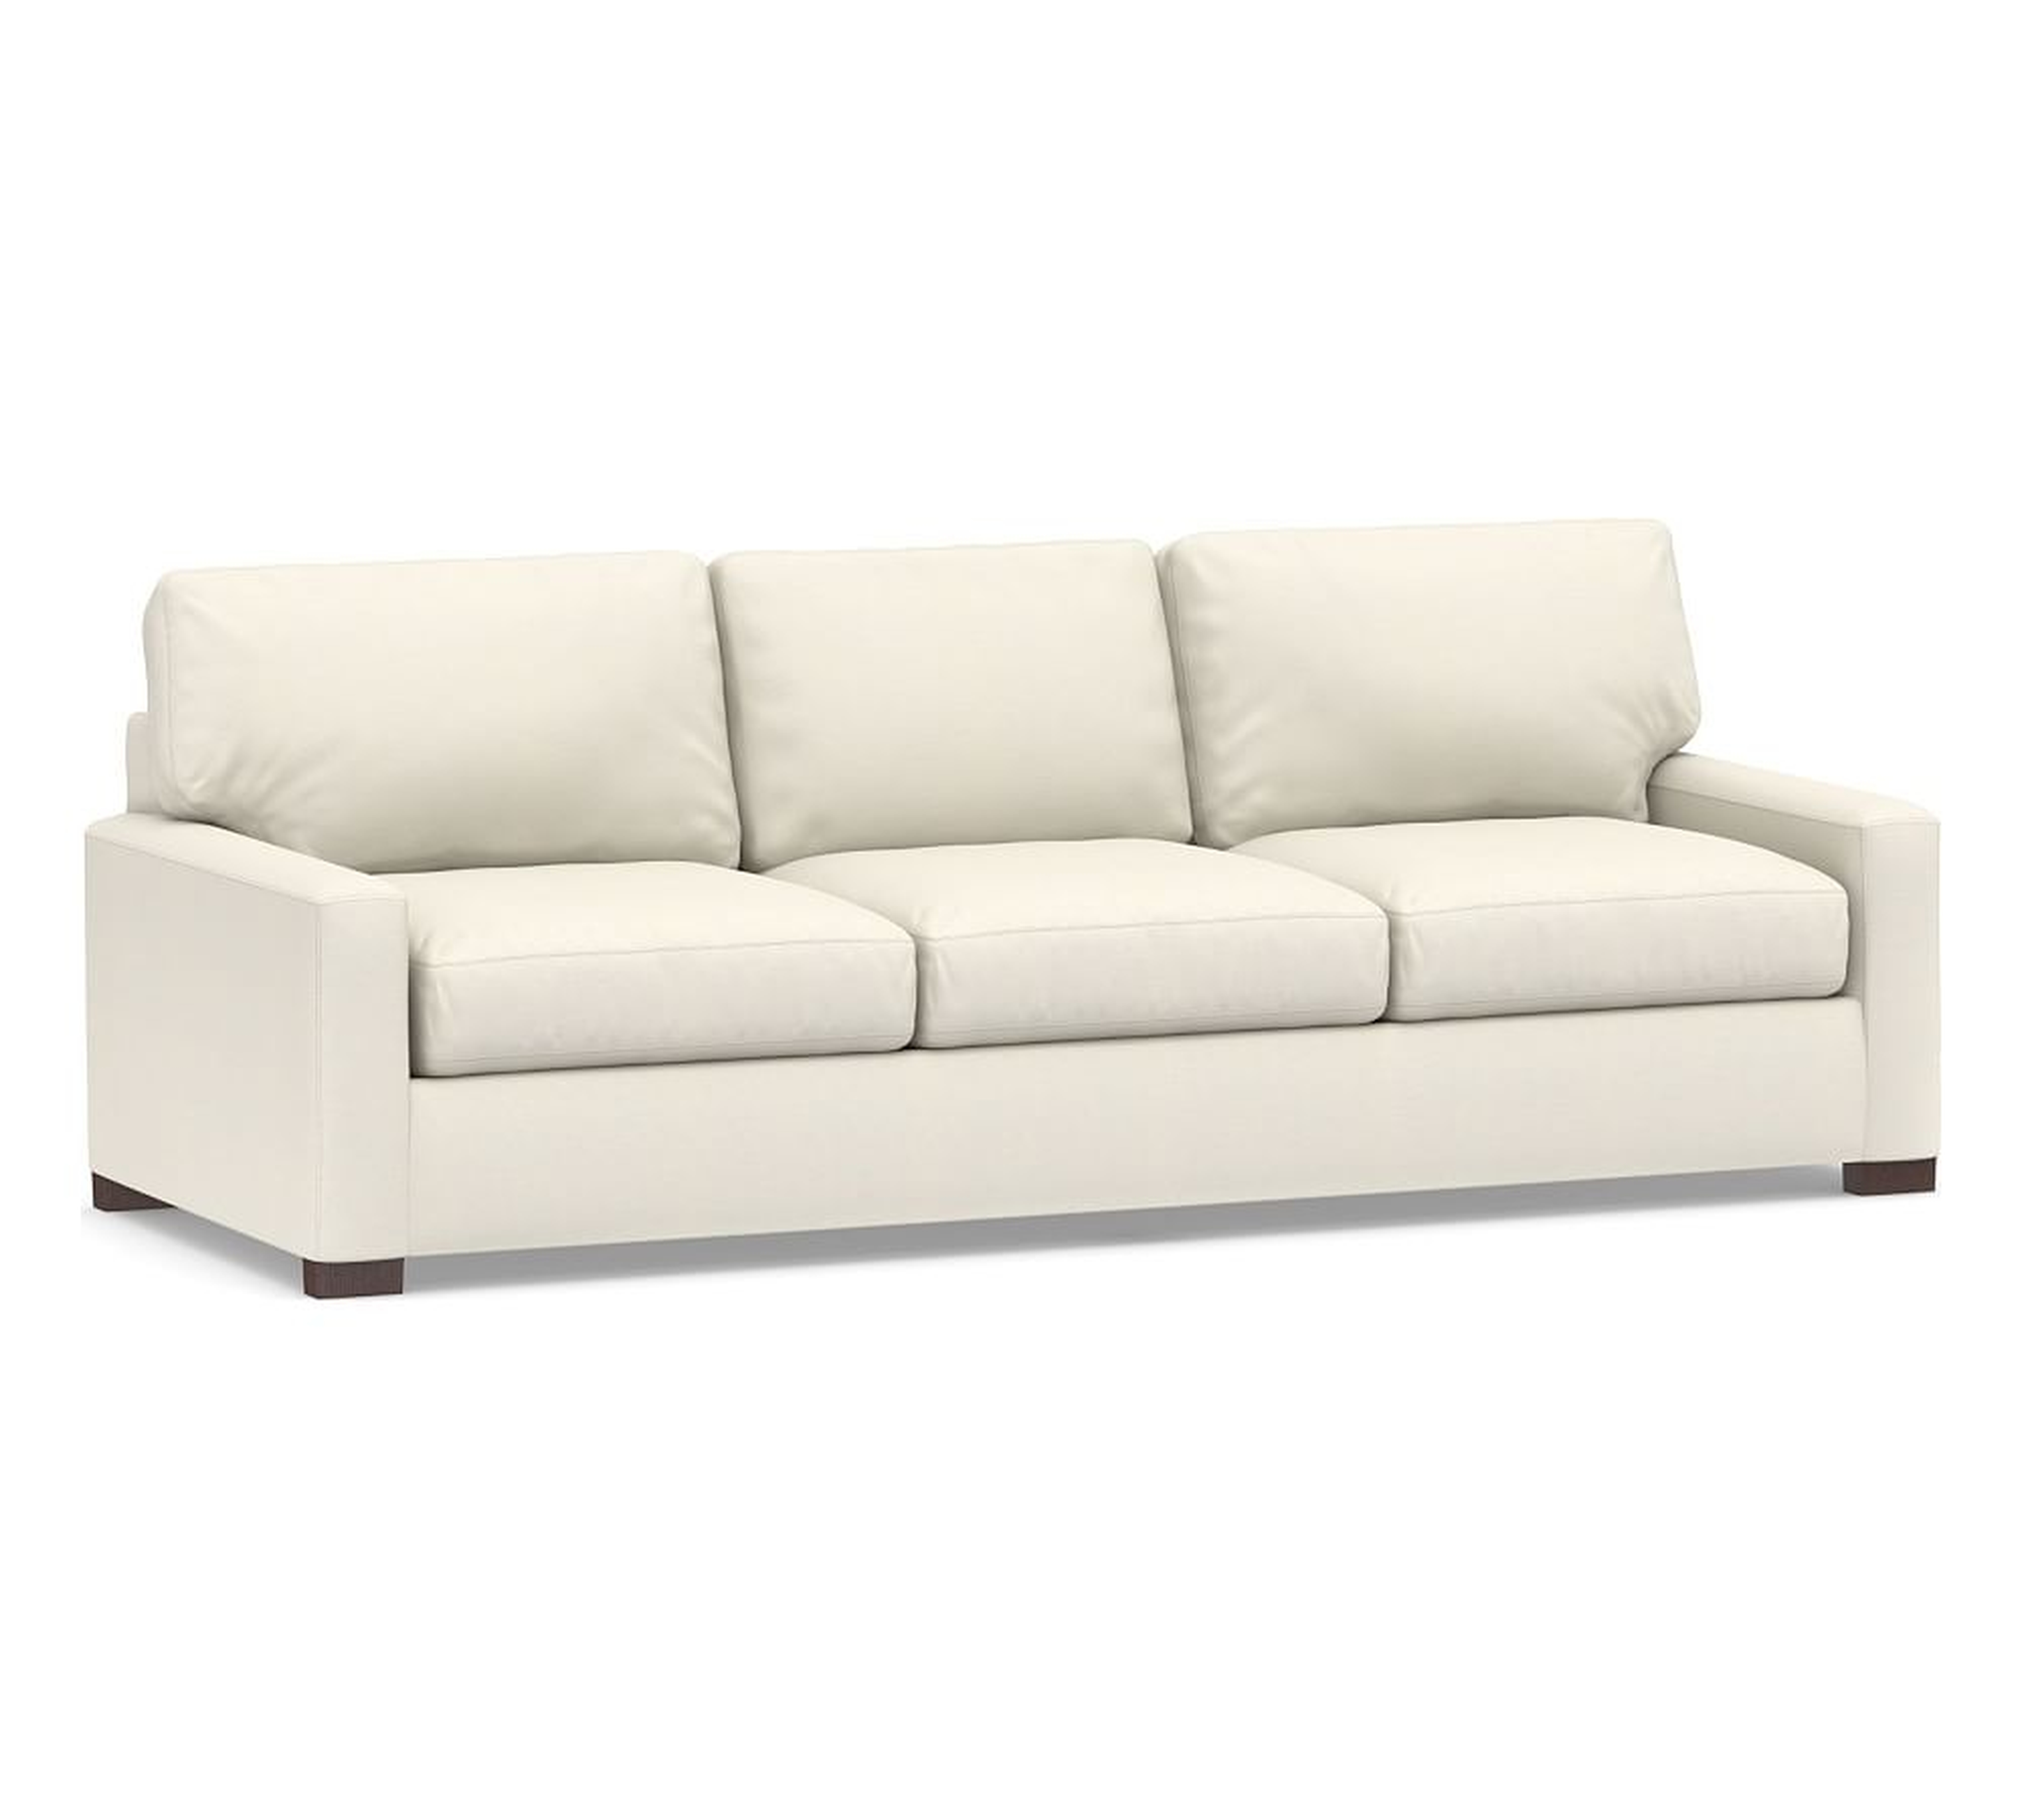 Turner Square Arm Upholstered Grand Sofa 3-Seater 102.5", Down Blend Wrapped Cushions, Dove, Performance Heathered Basketweave - Pottery Barn